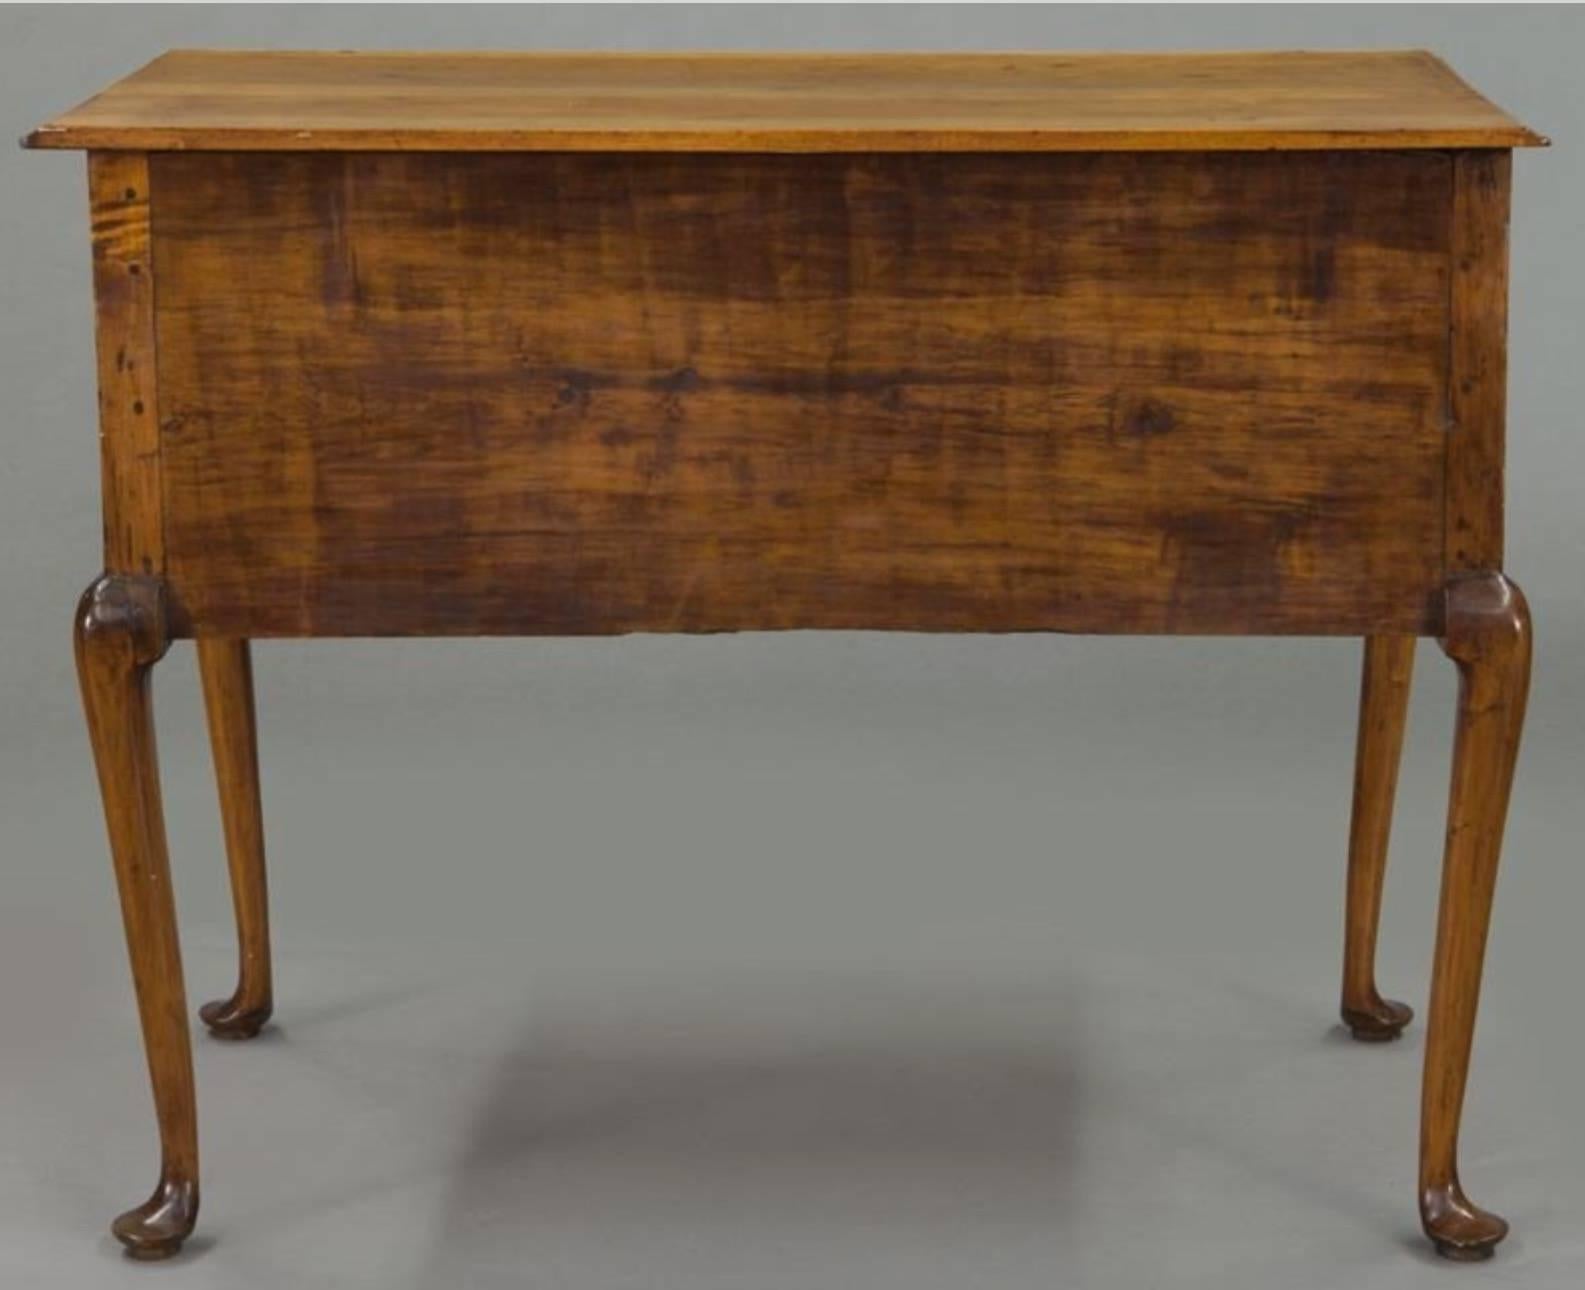 Hand-Crafted American 18th Century Maple Dressing Table